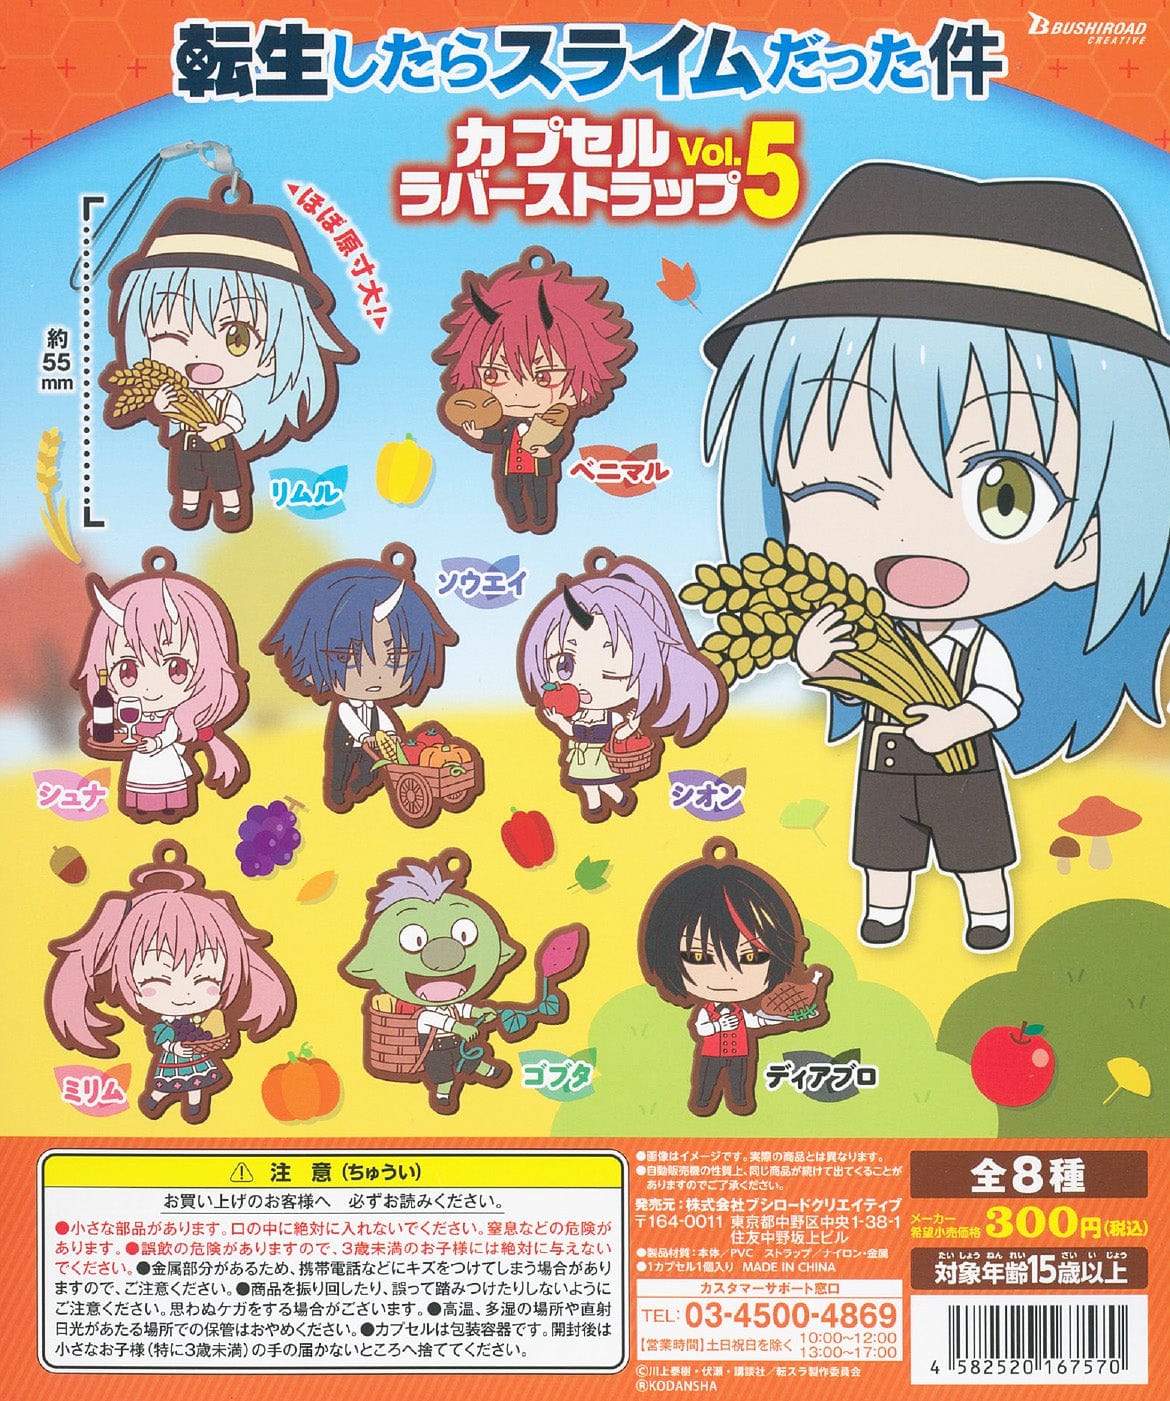 Bushiroad Creative CP1013 That Time I Got Reincarnated as a Slime Capsule Rubber Strap Vol. 5